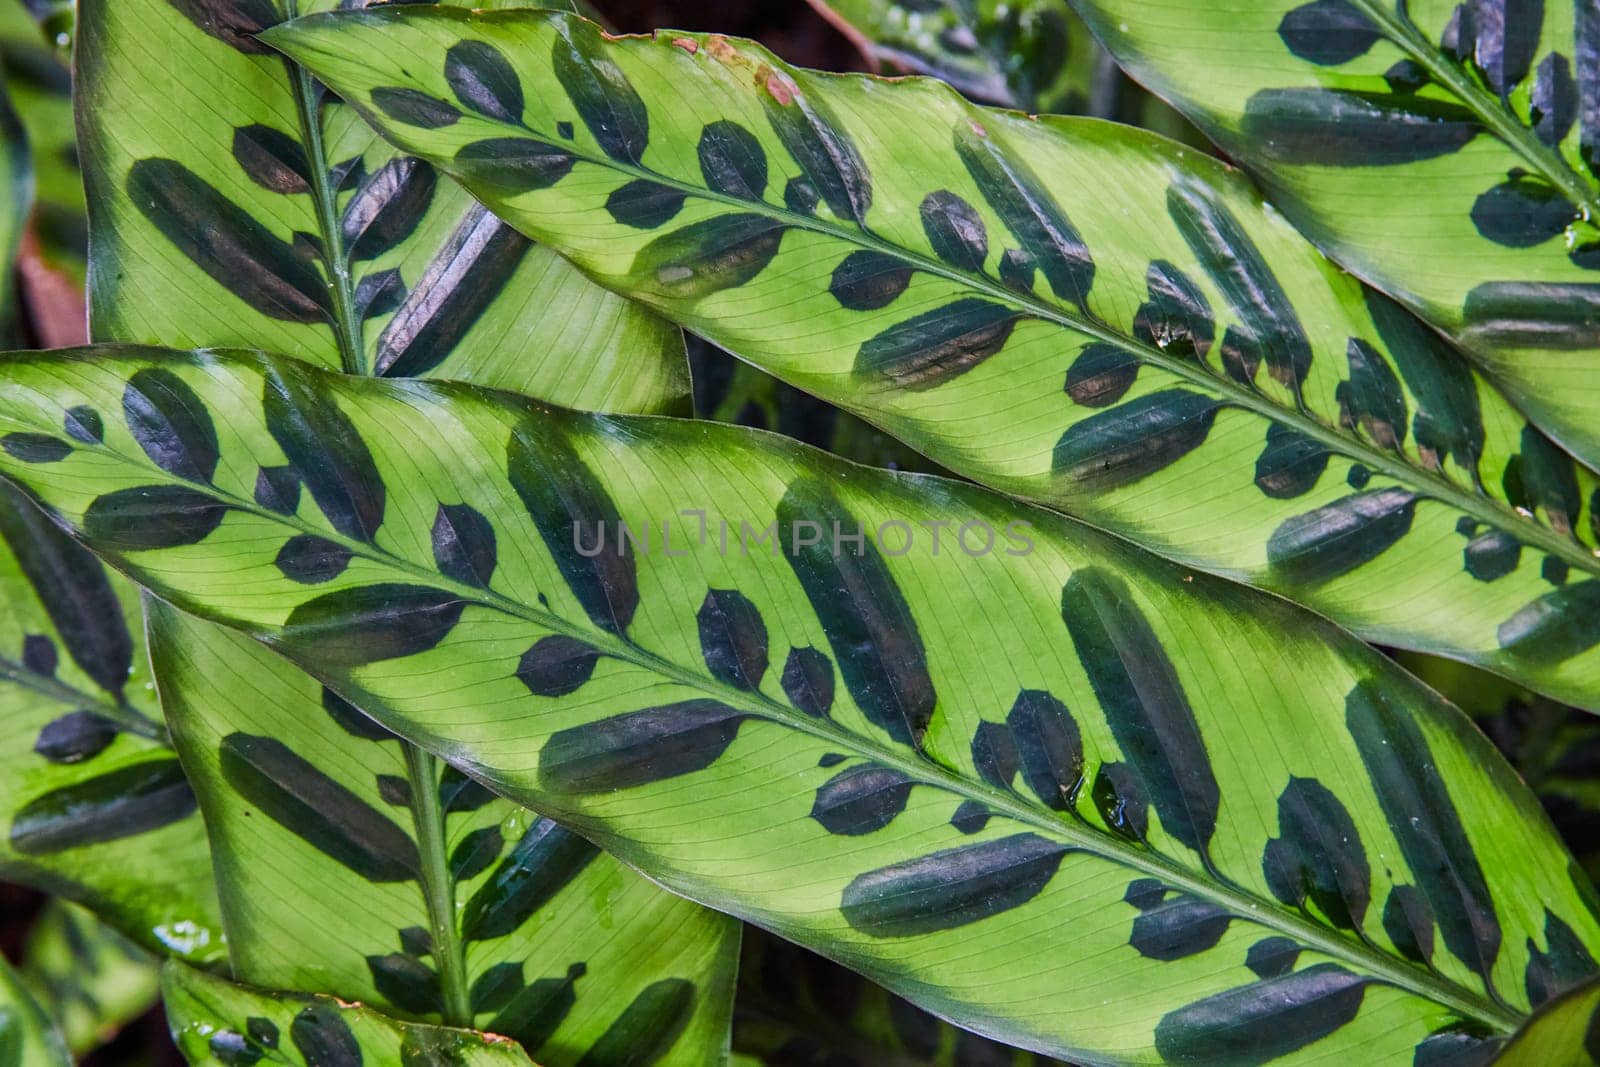 Vibrant Prayer Plant Leaves with Water Droplets, Top View by njproductions